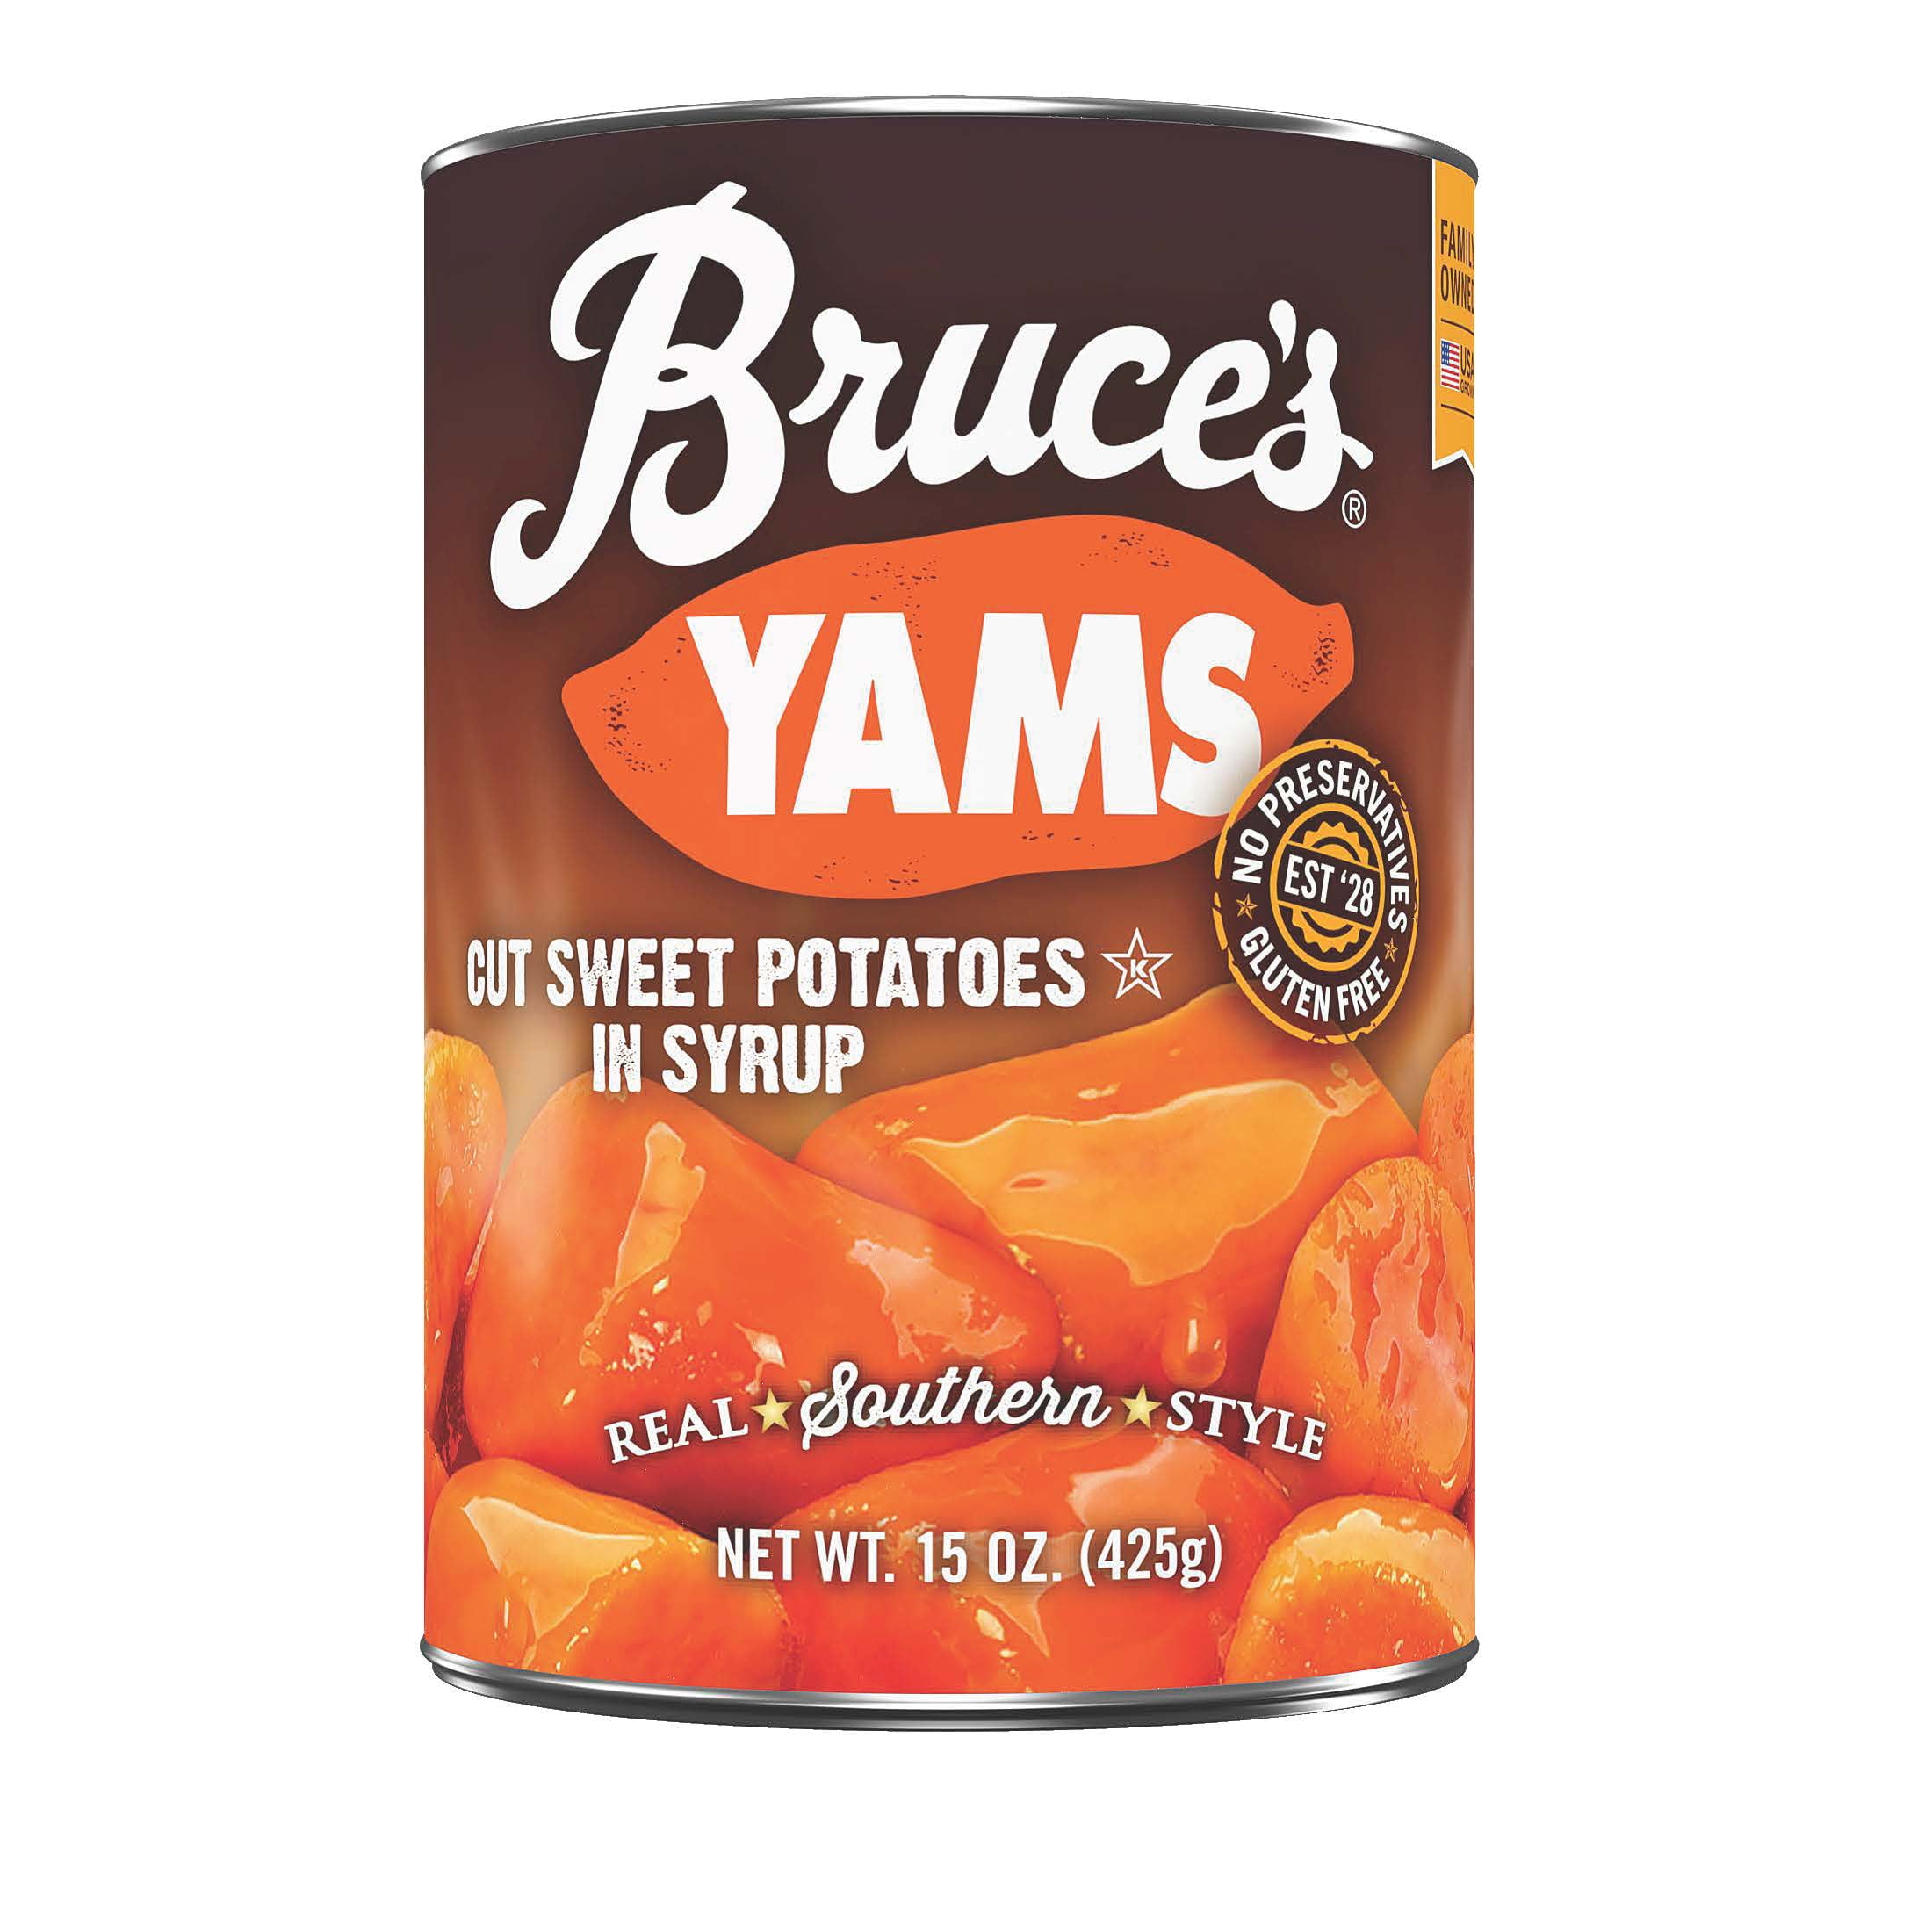 Bruce's Canned Yams Cut Sweet Potatoes in Syrup, 15 oz , Can